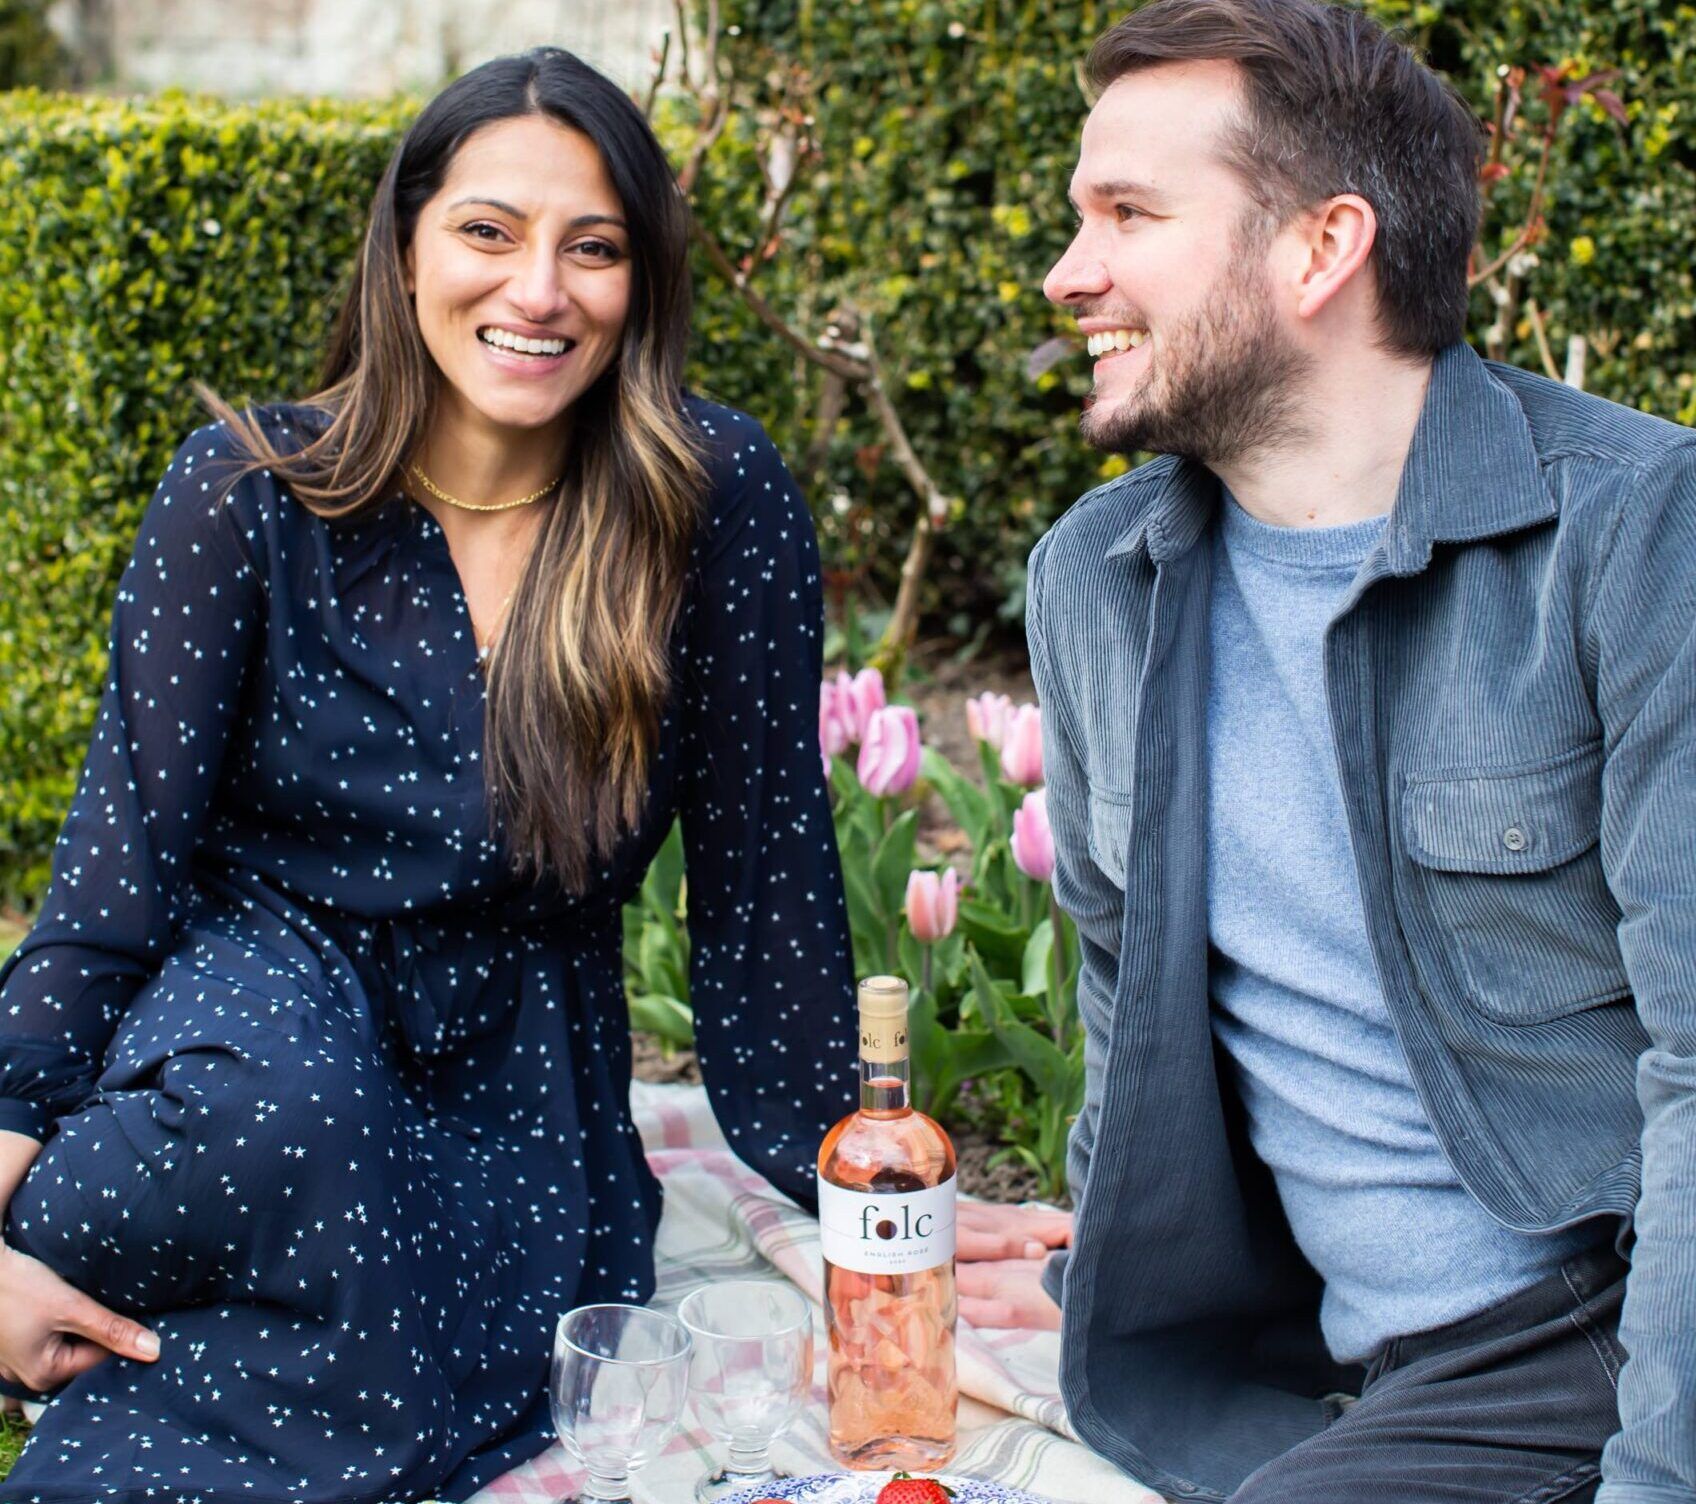 How Folc hopes to build a ‘tribe’ of followers for English rosé wine